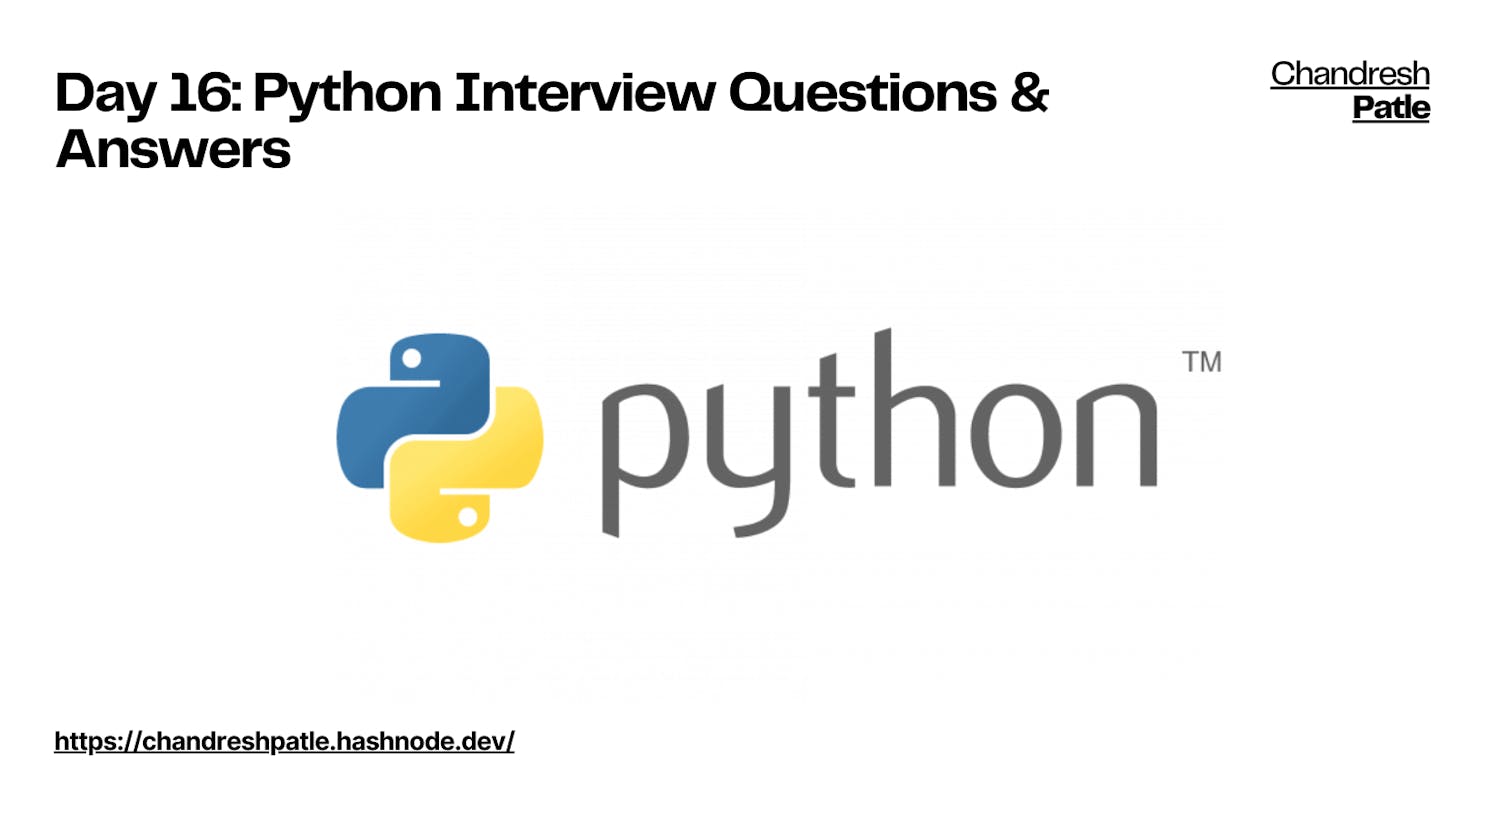 Day 16: Interview Questions (Beginner and Intermediate) and Real-World Python in DevOps